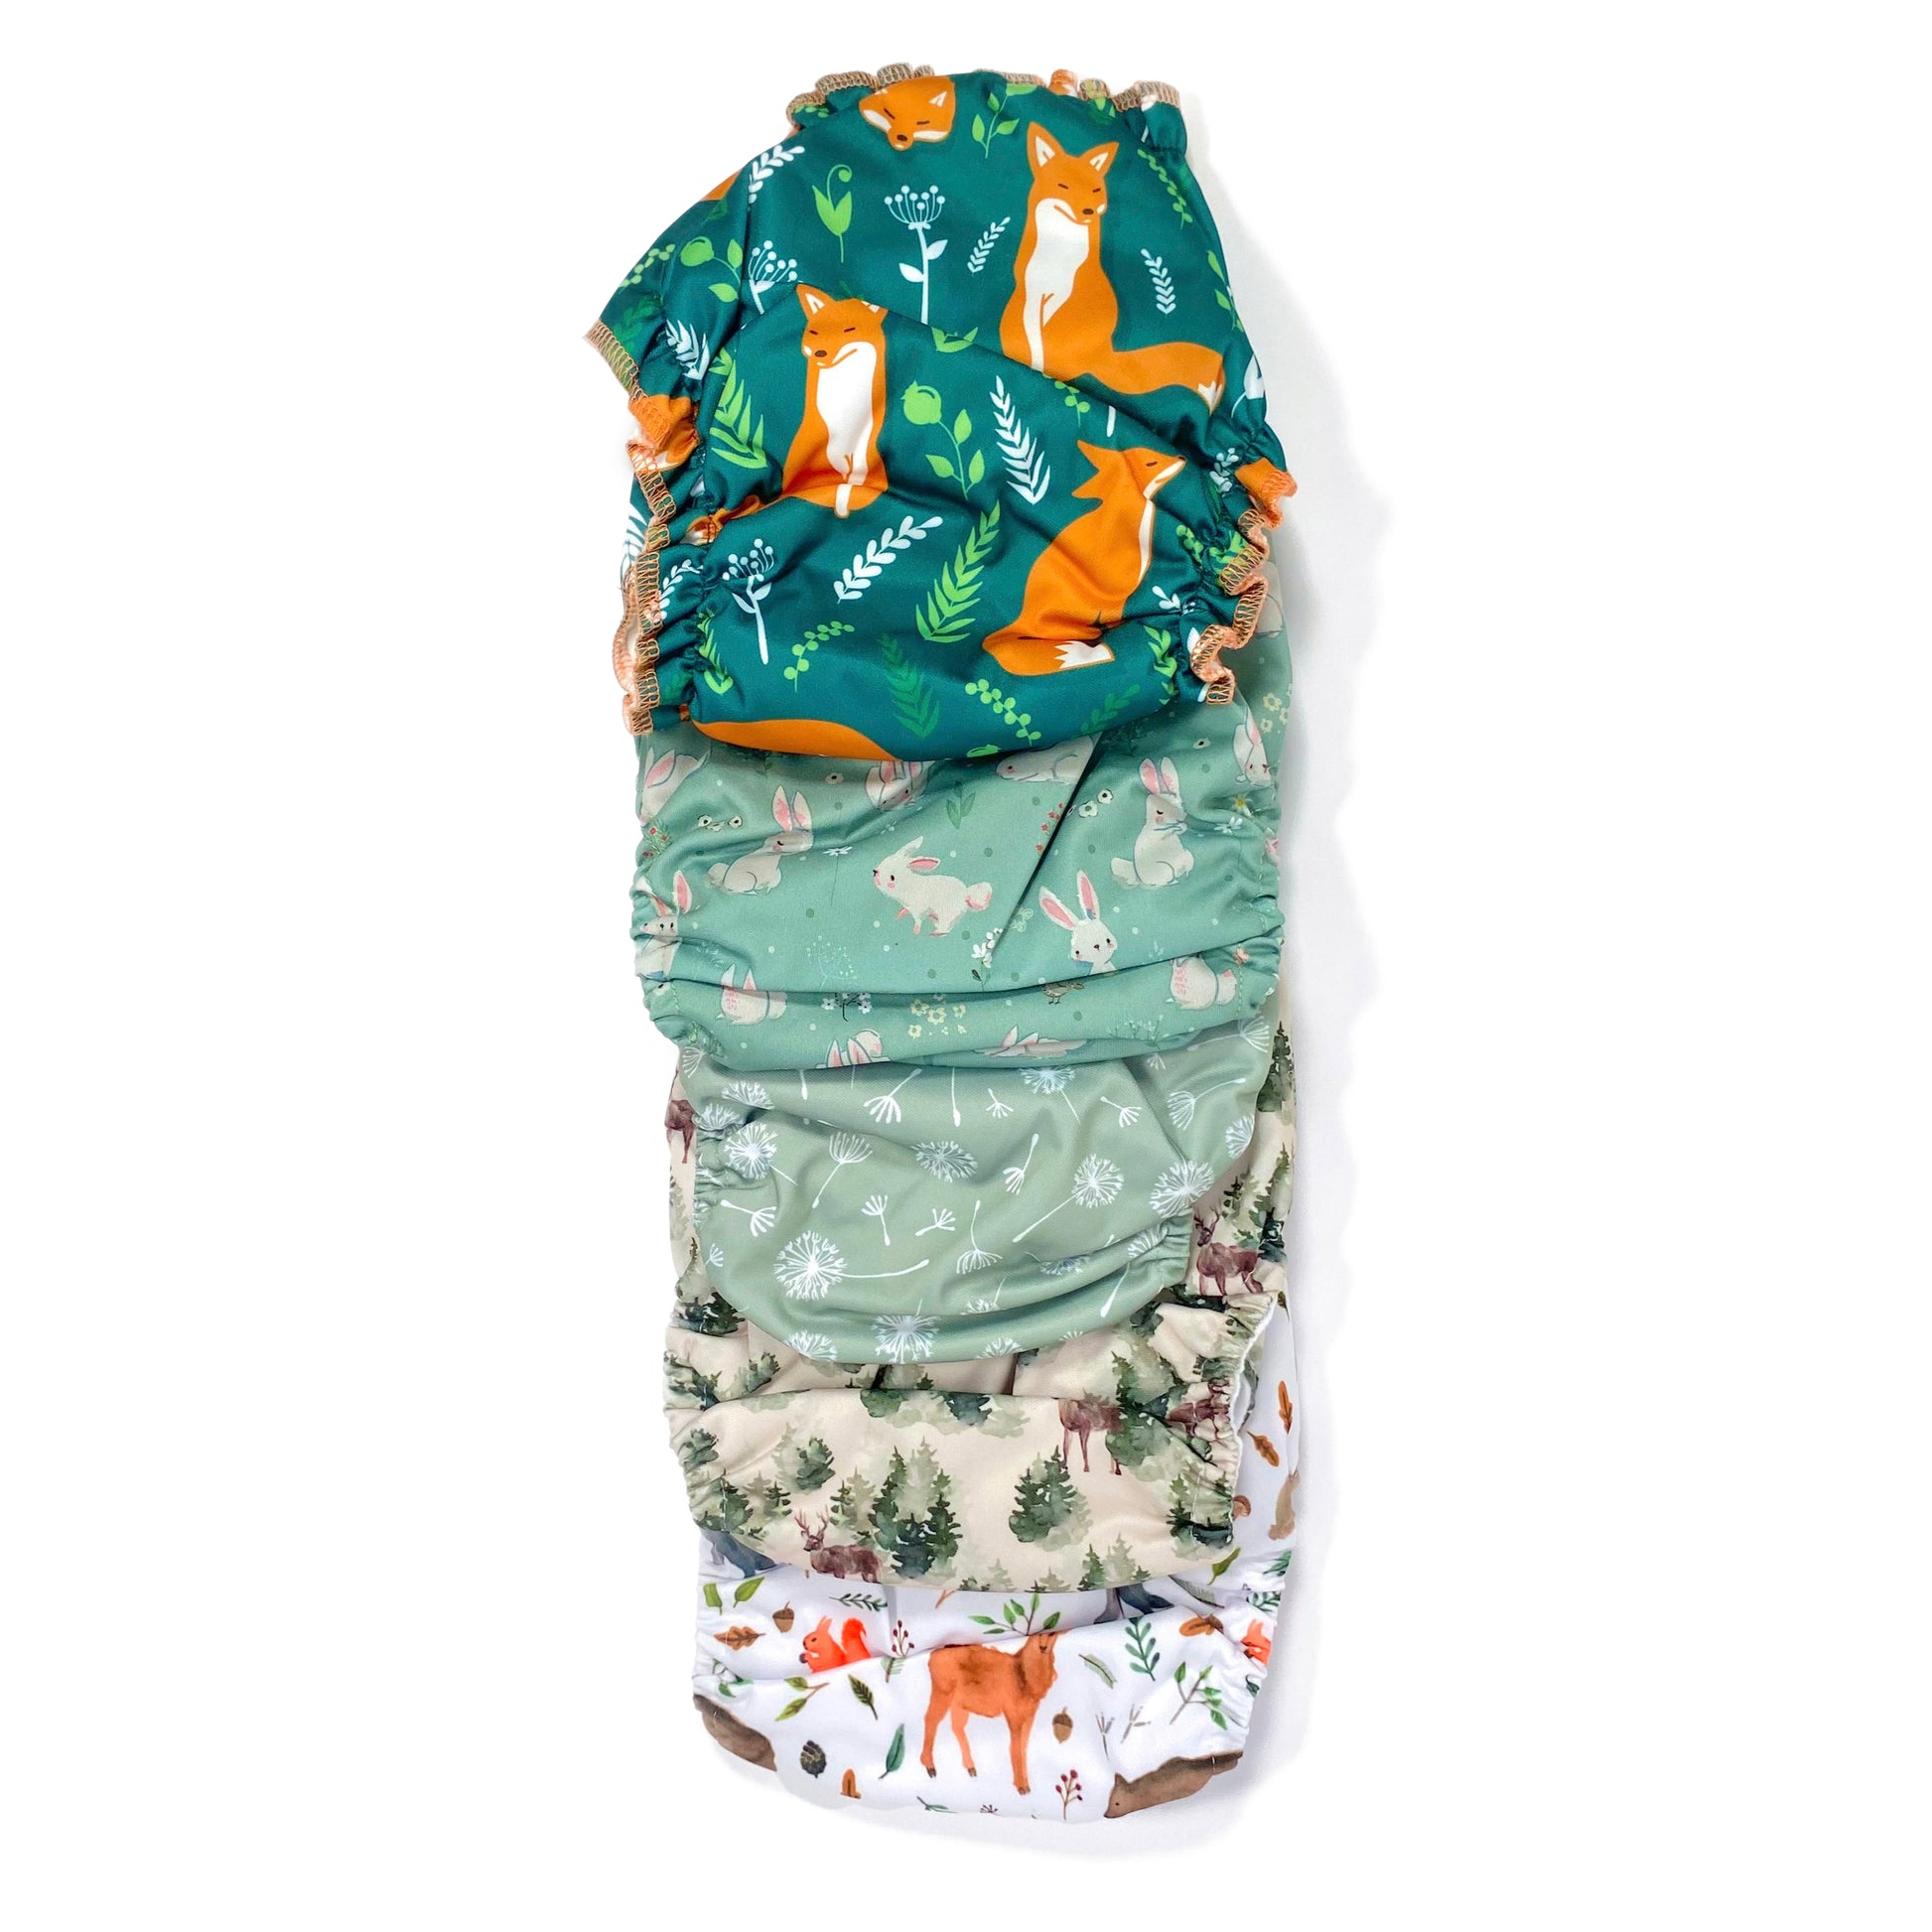 A set of five reusable nappies, made from 100% recycled polyester. The included nappies are: Woodland Friends, Winter Forest, Green Dandelion, Green Rabbits and Green Fox. View shows all five nappies back facing, in a vertical line.